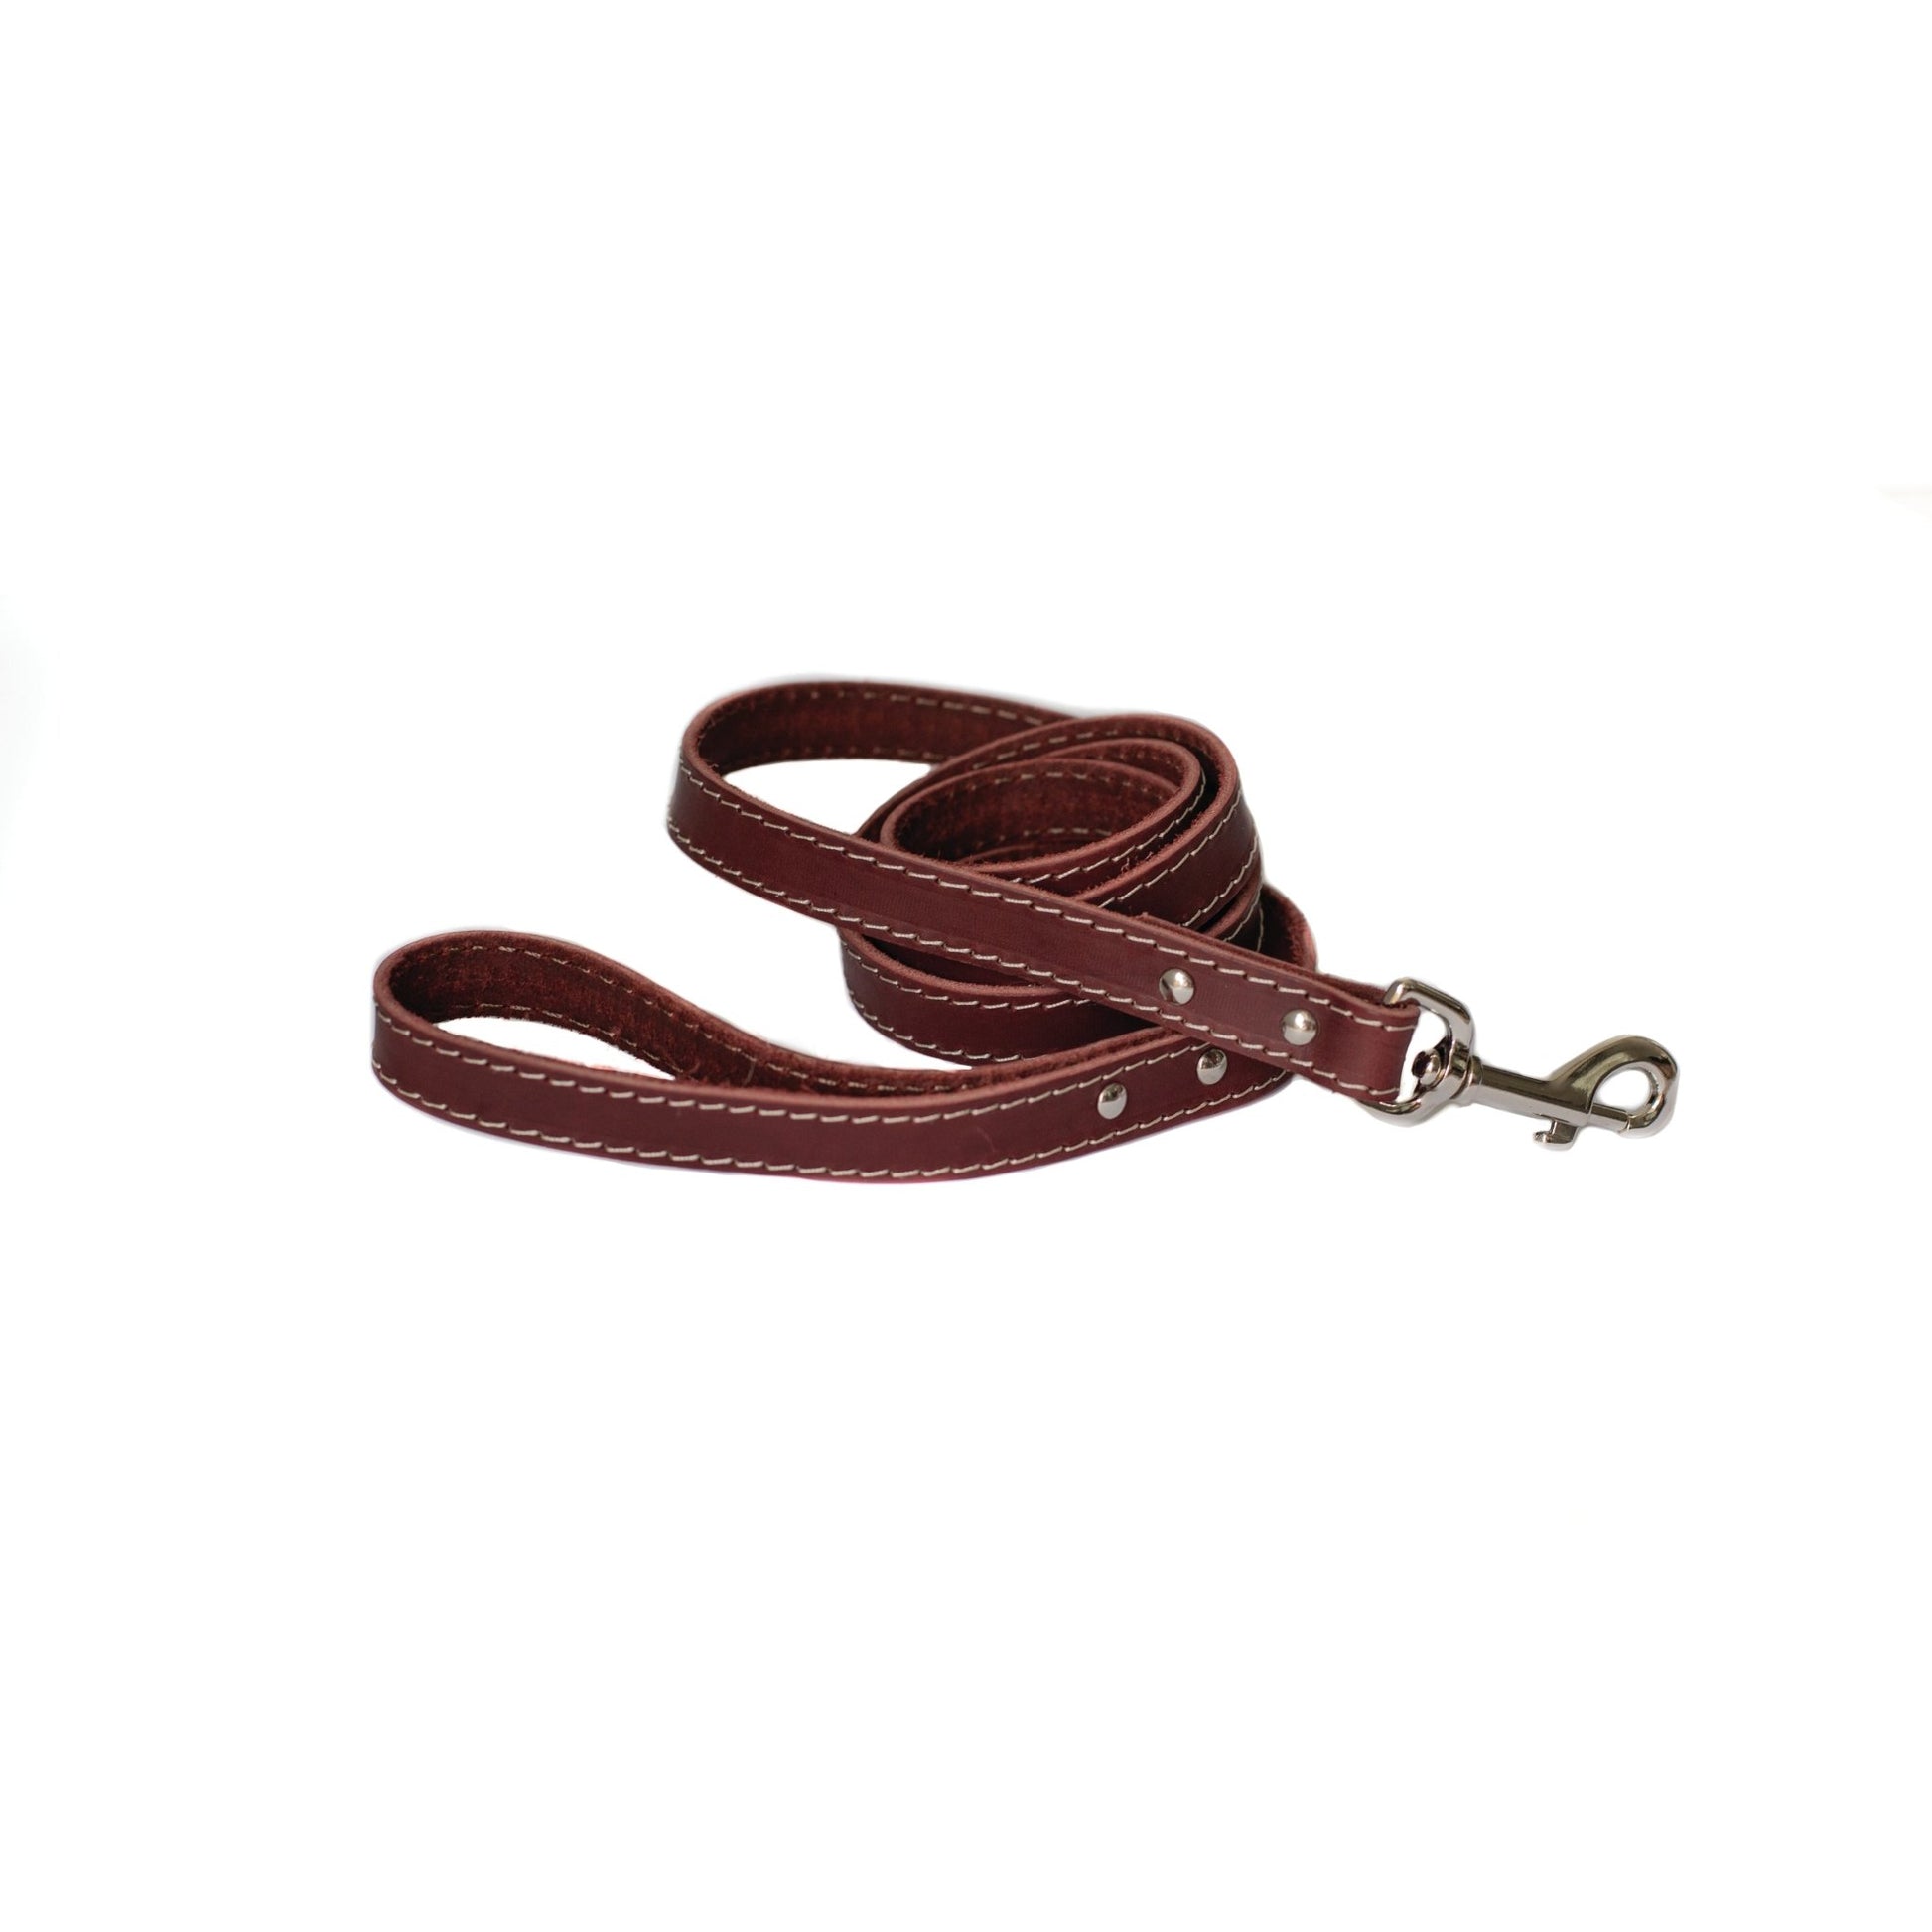 Euro Dog Leather Leashes Chocolate Traditional Leather